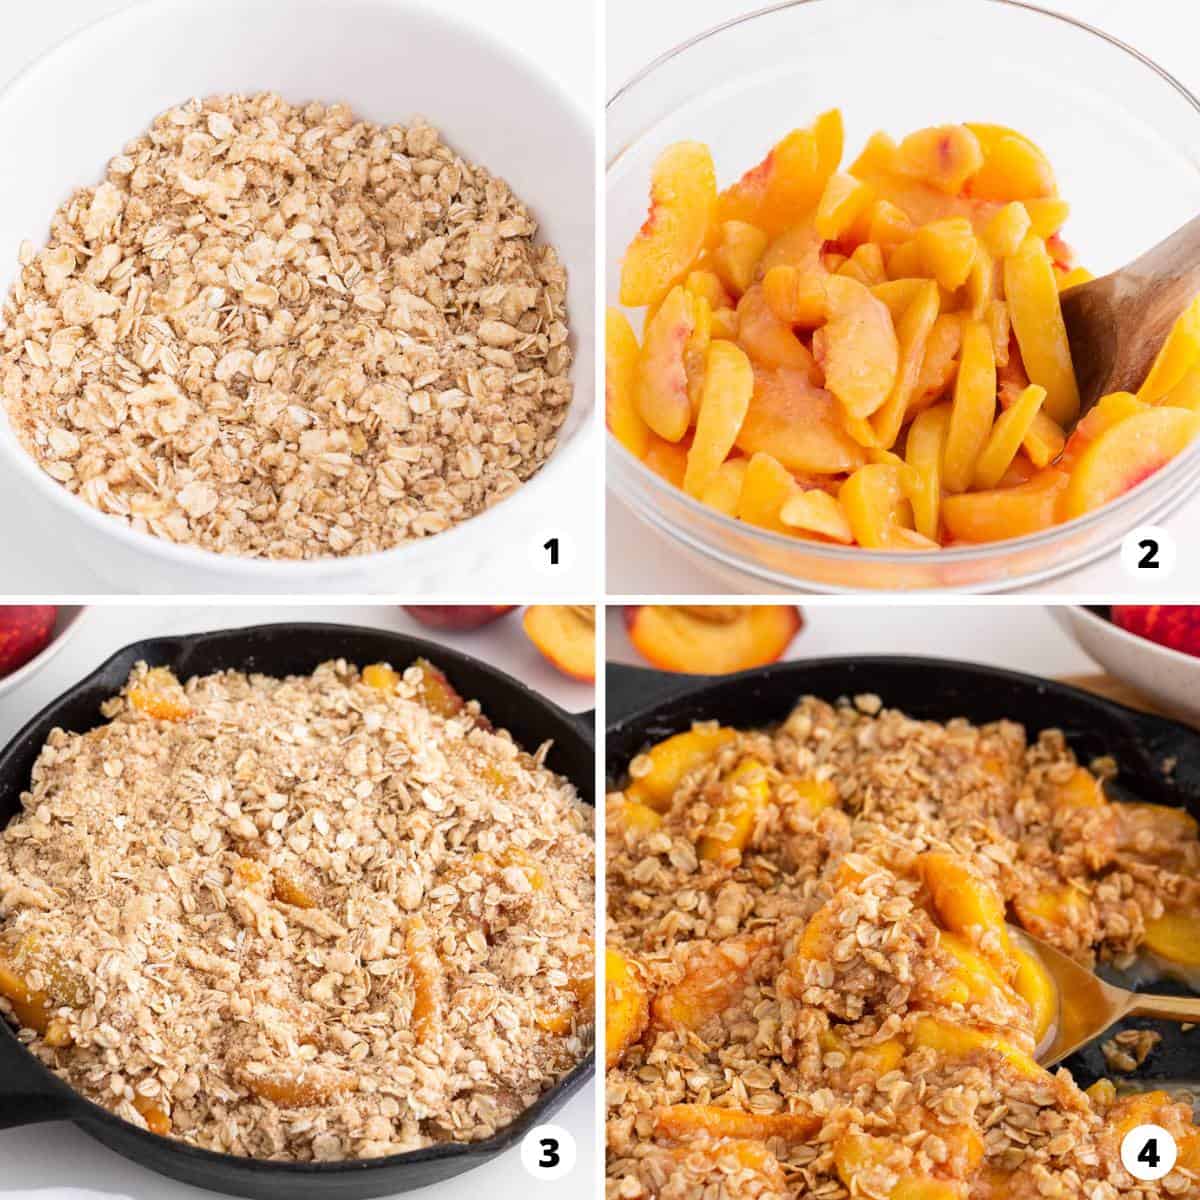 Showing how to make peach crisp in a 4 step collage.